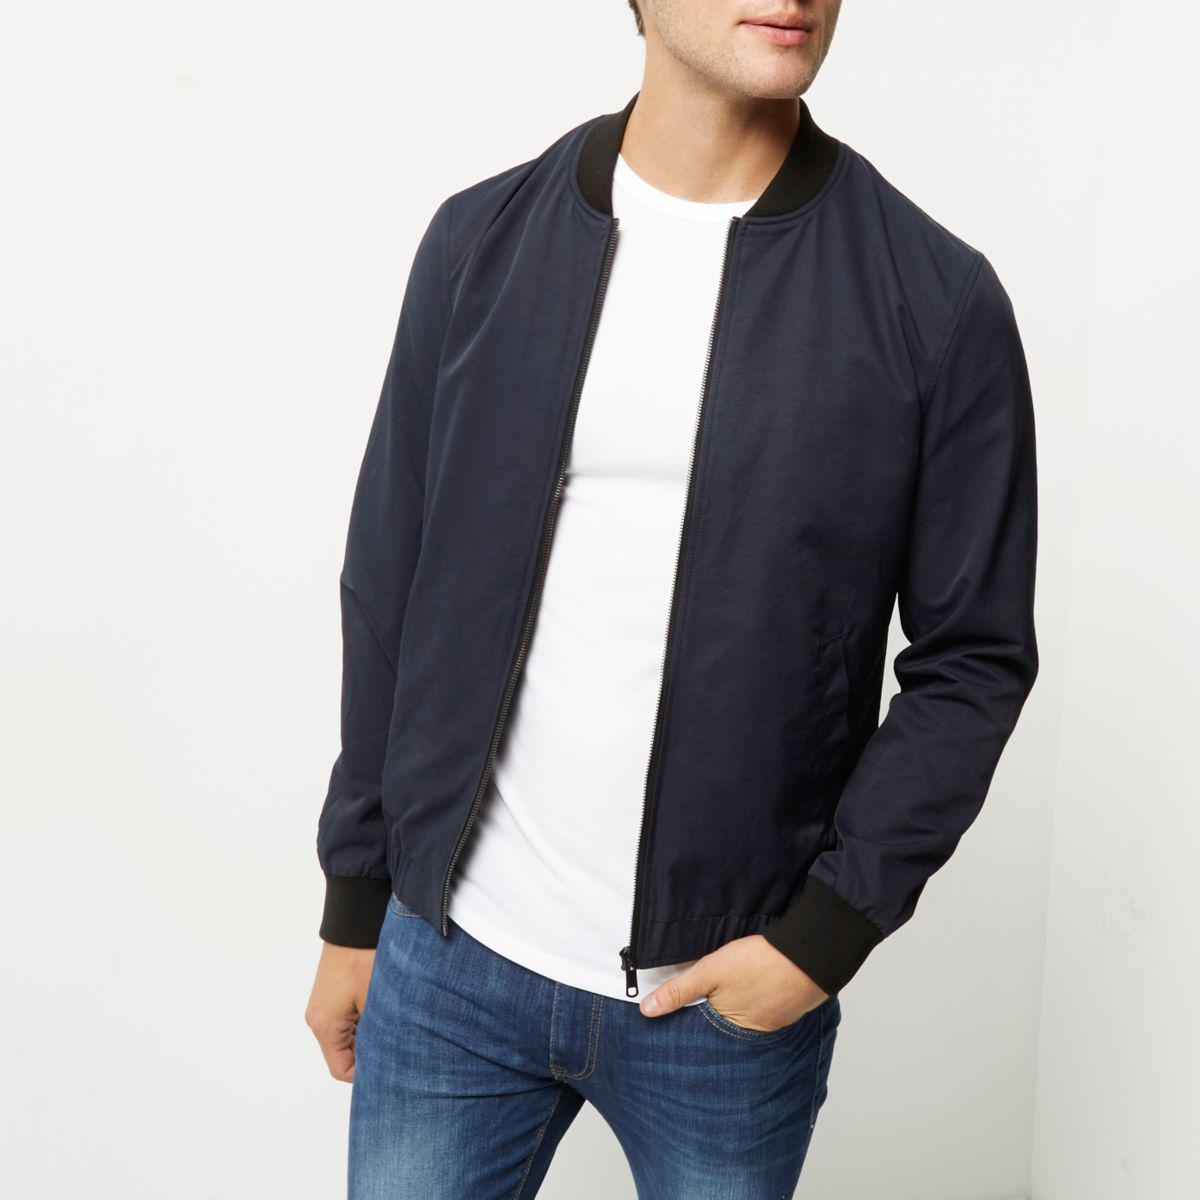 Lyst - River Island Navy Blue Casual Bomber Jacket in Blue for Men